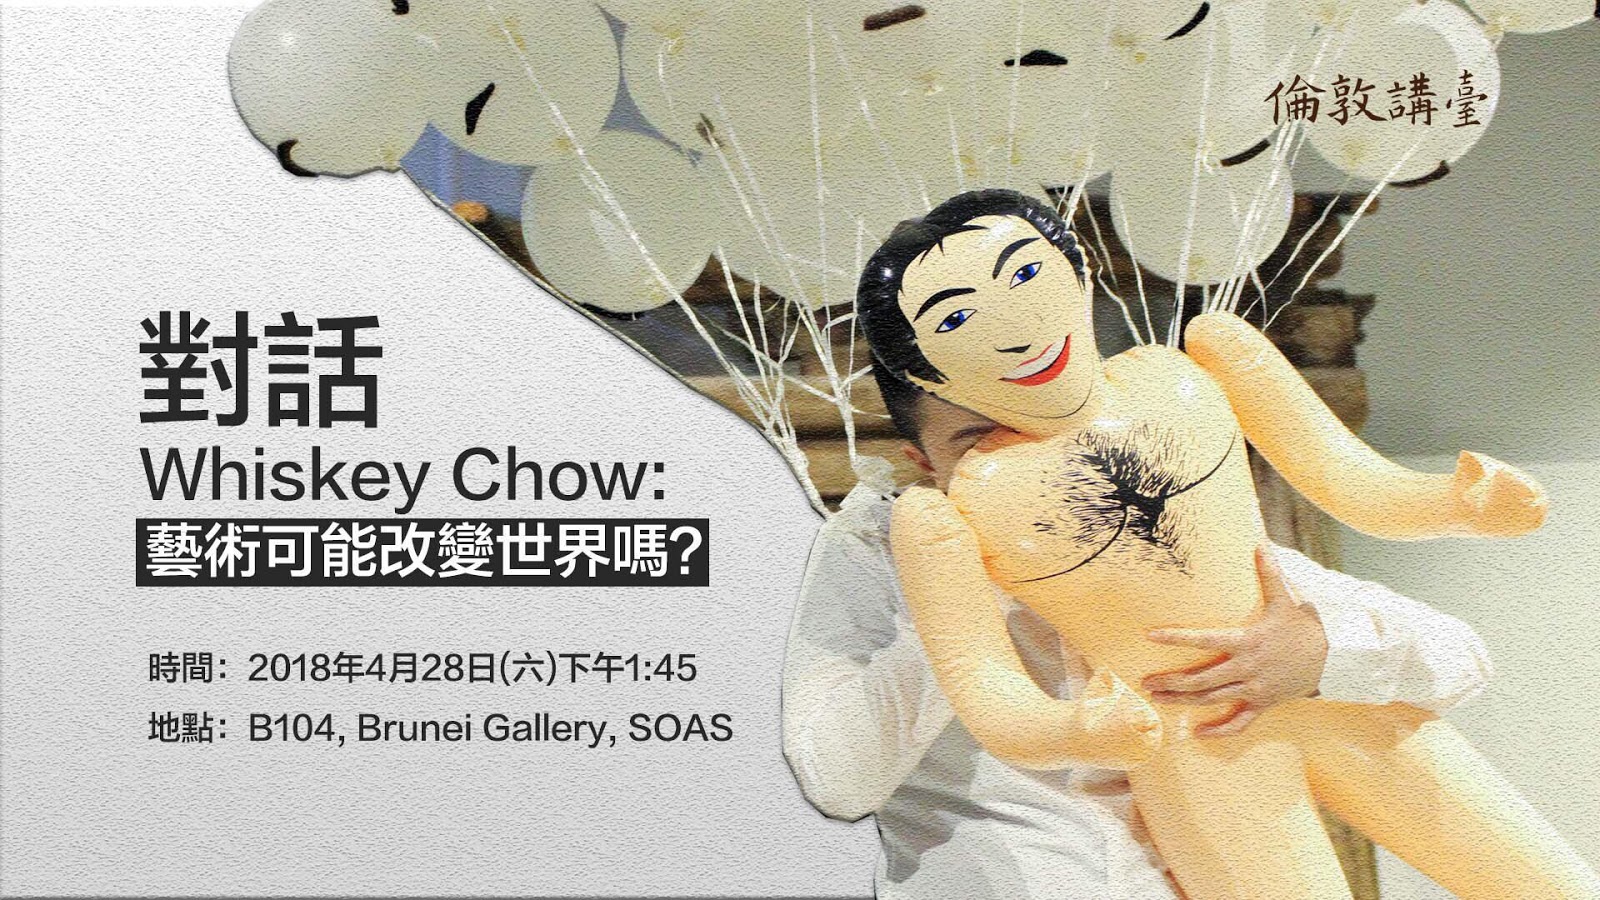 image from 對話Whiskey Chow：藝術可能改變世界嗎？ 